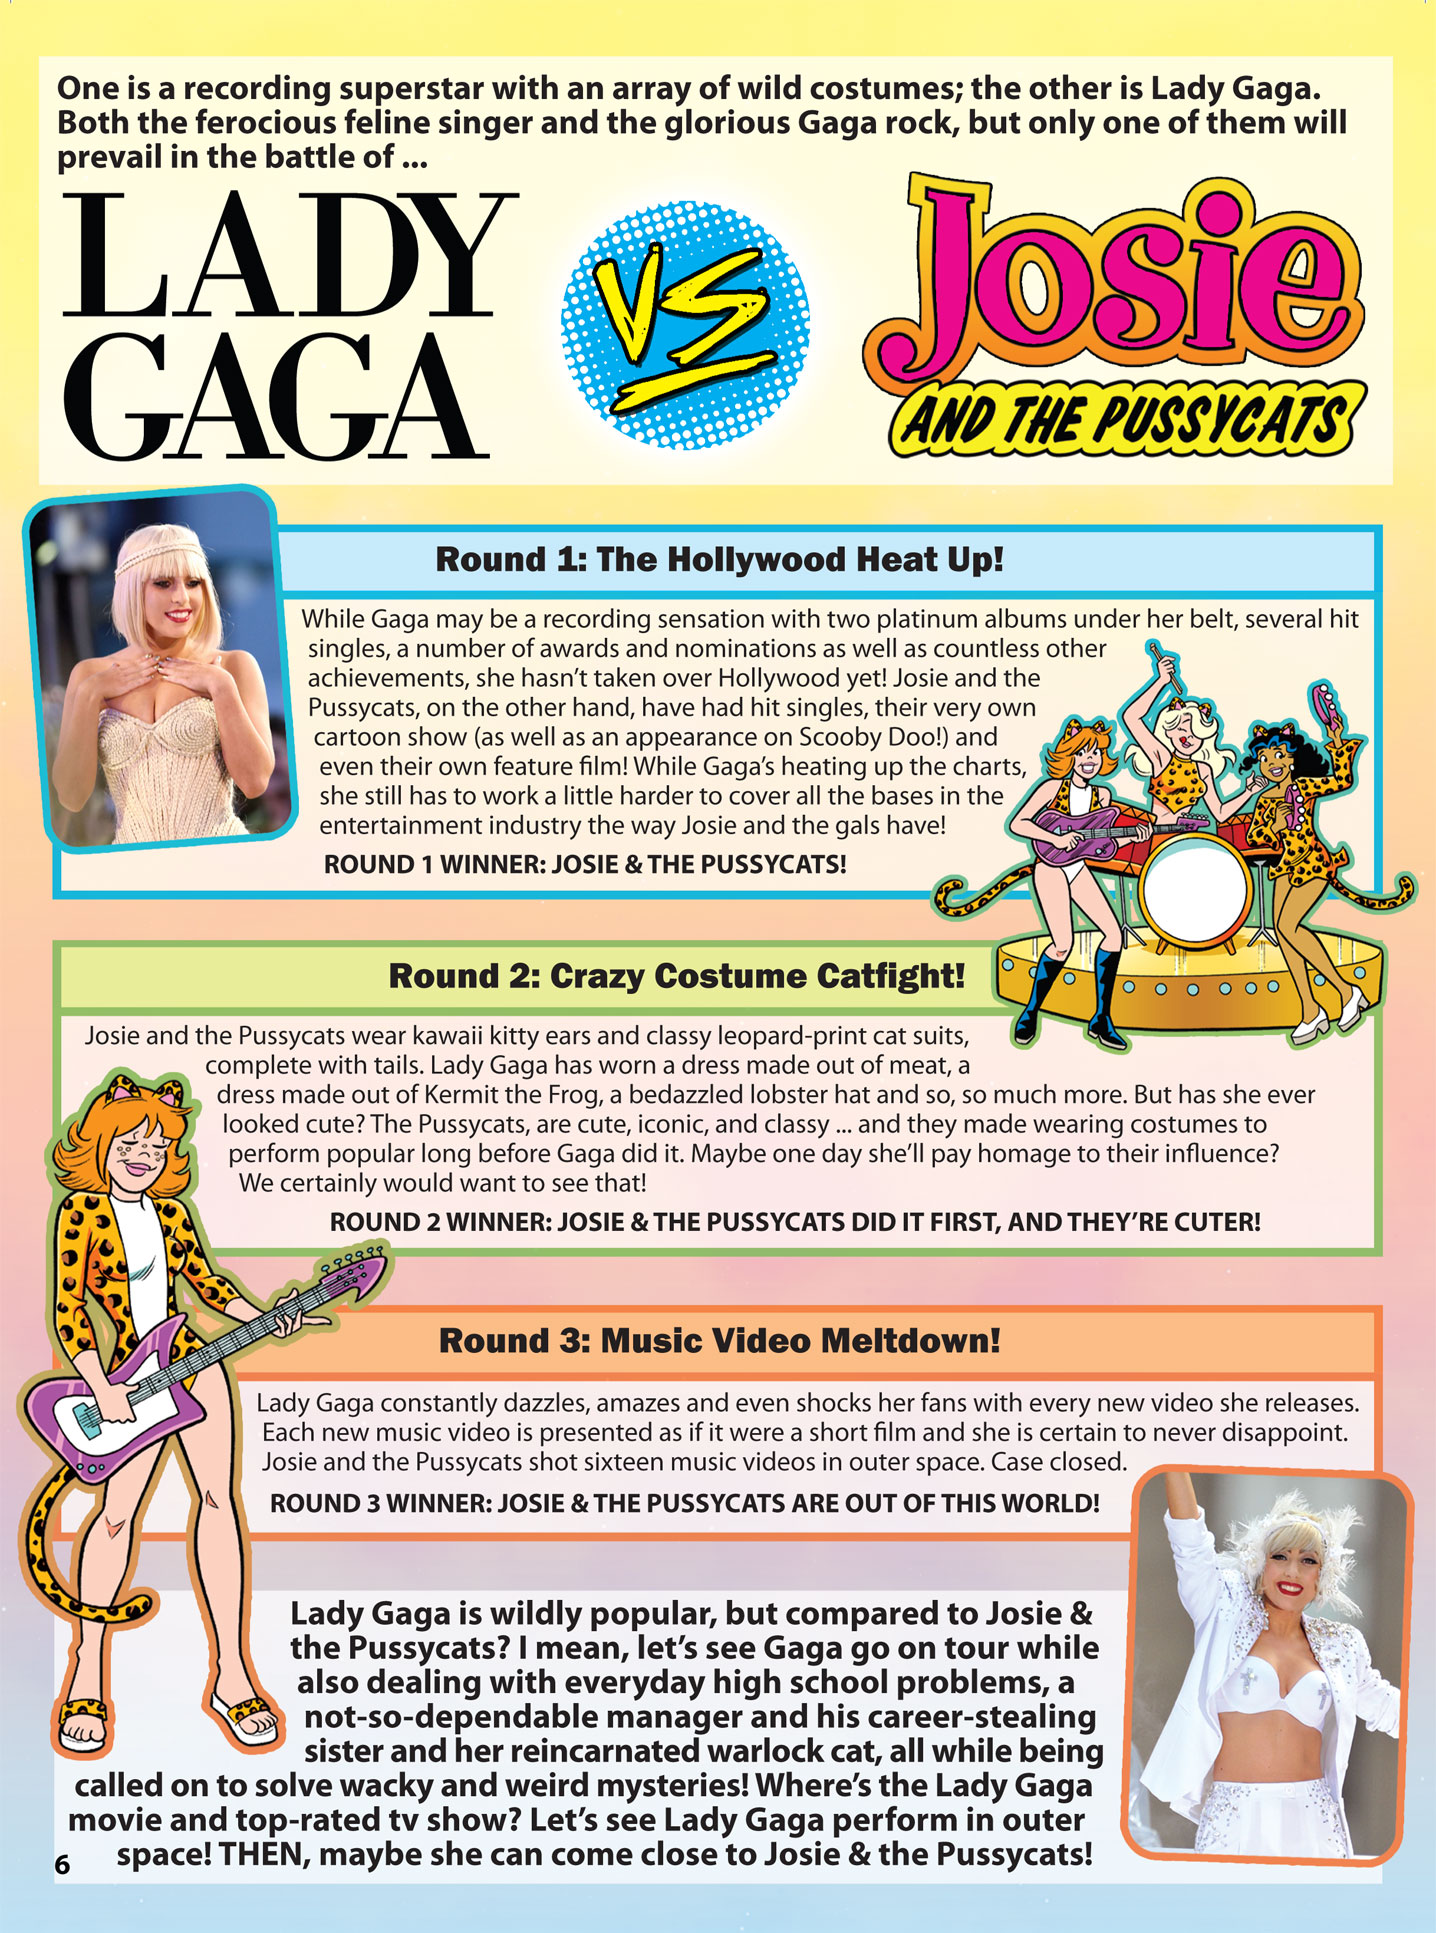 Lady Gaga vs. Josie and the Pussycats